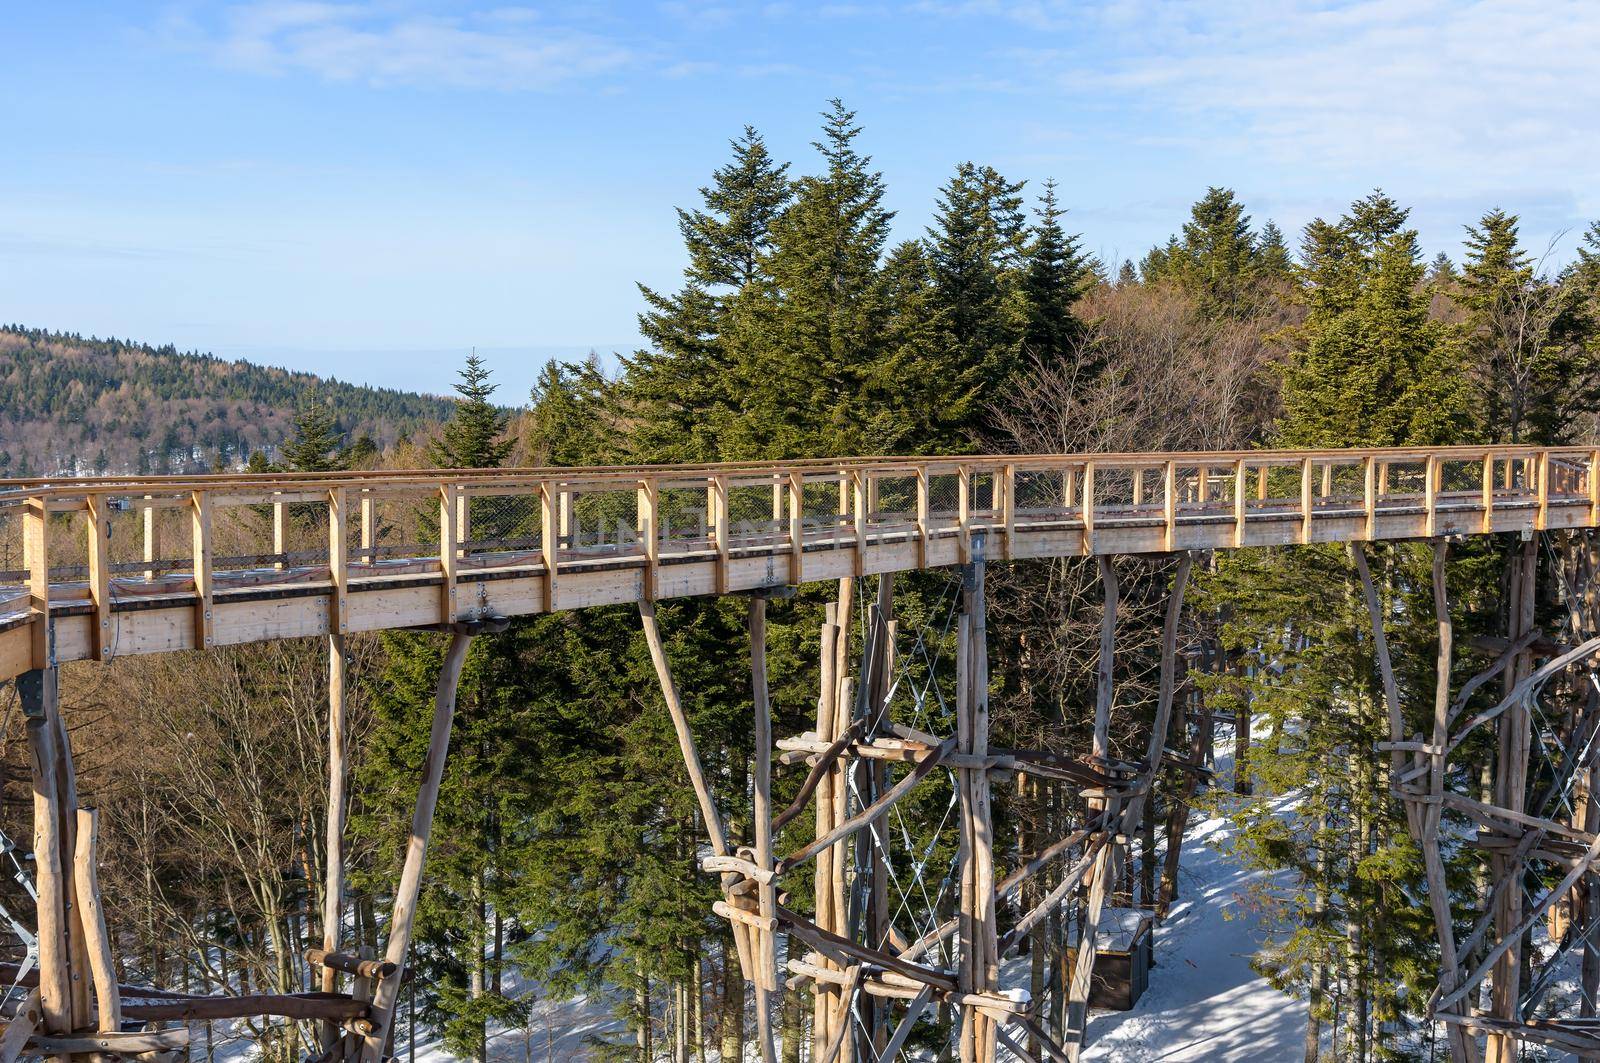 Wooden path of the treetop observation tower amogns the trees at Slotwiny Arena ski station in Krynica Zdroj, Poland